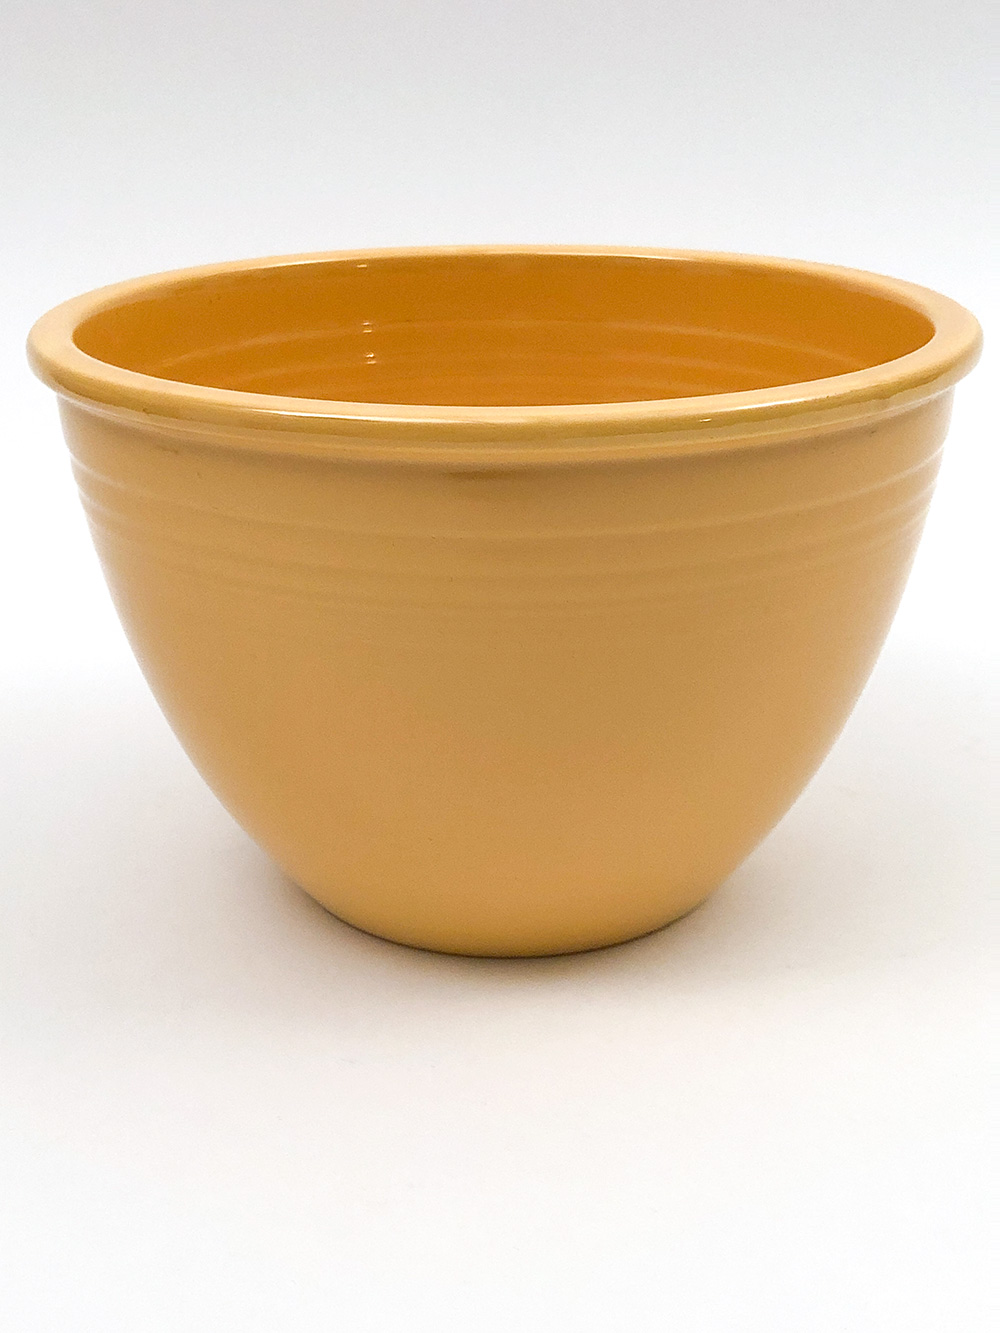 inside view Number 4 radioactive yellow vintage fiesta mixing bowl